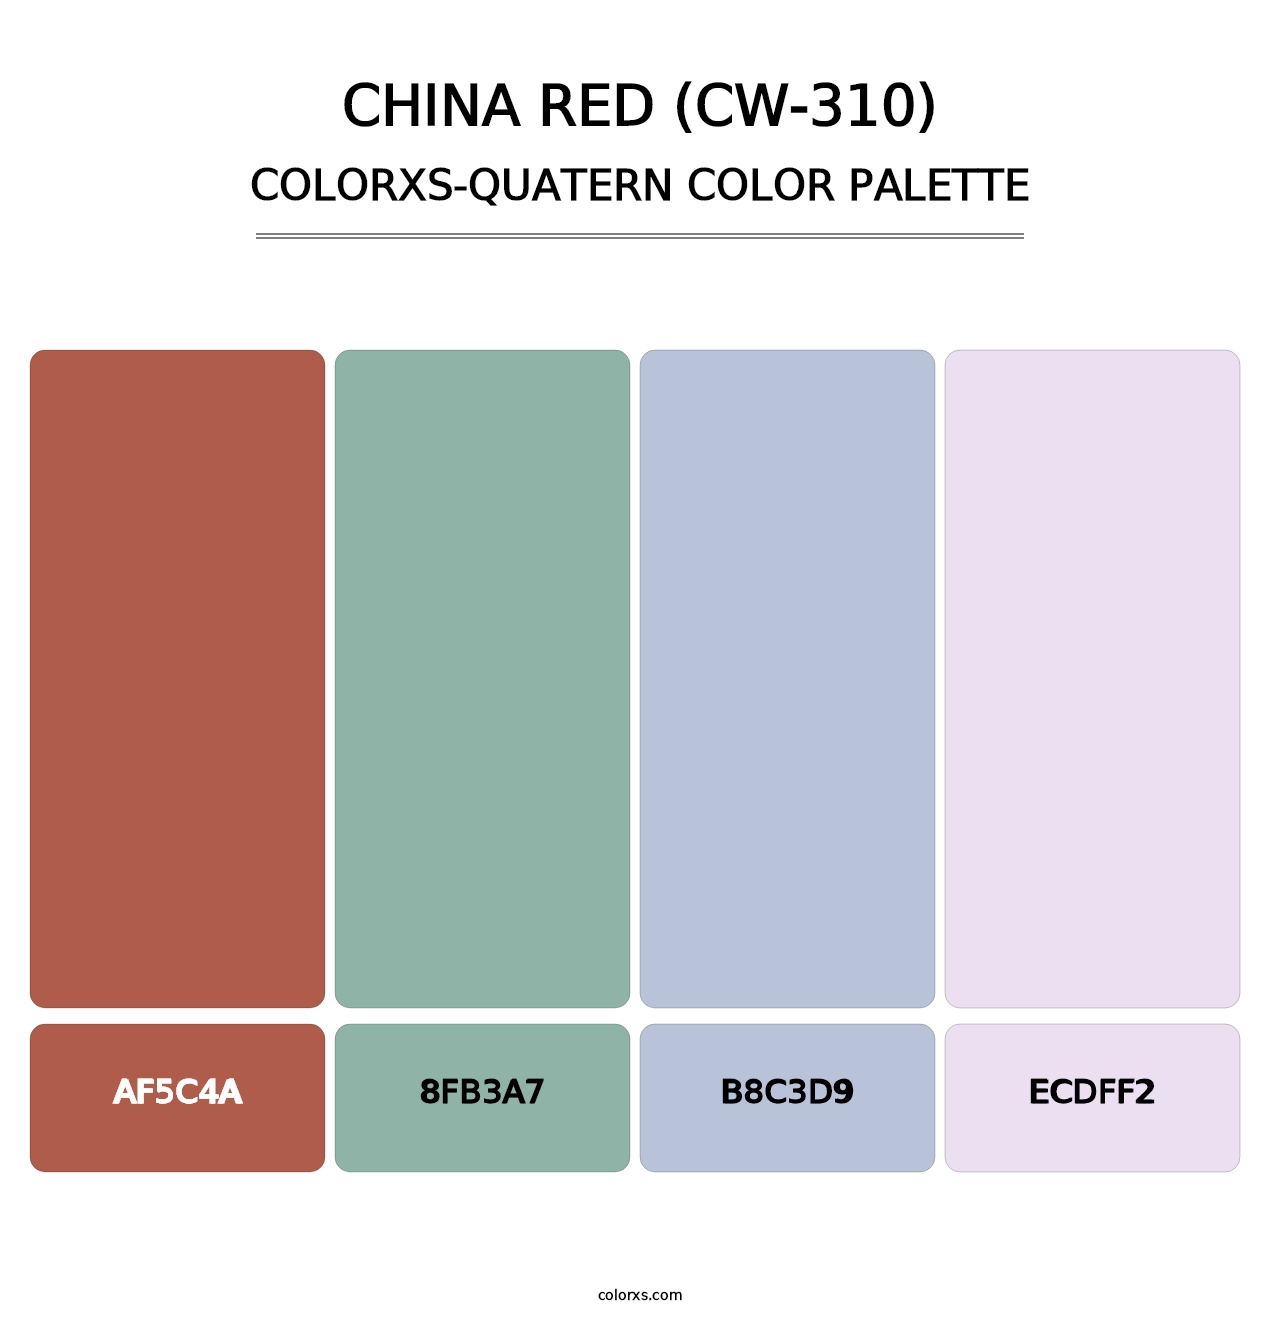 China Red (CW-310) - Colorxs Quatern Palette